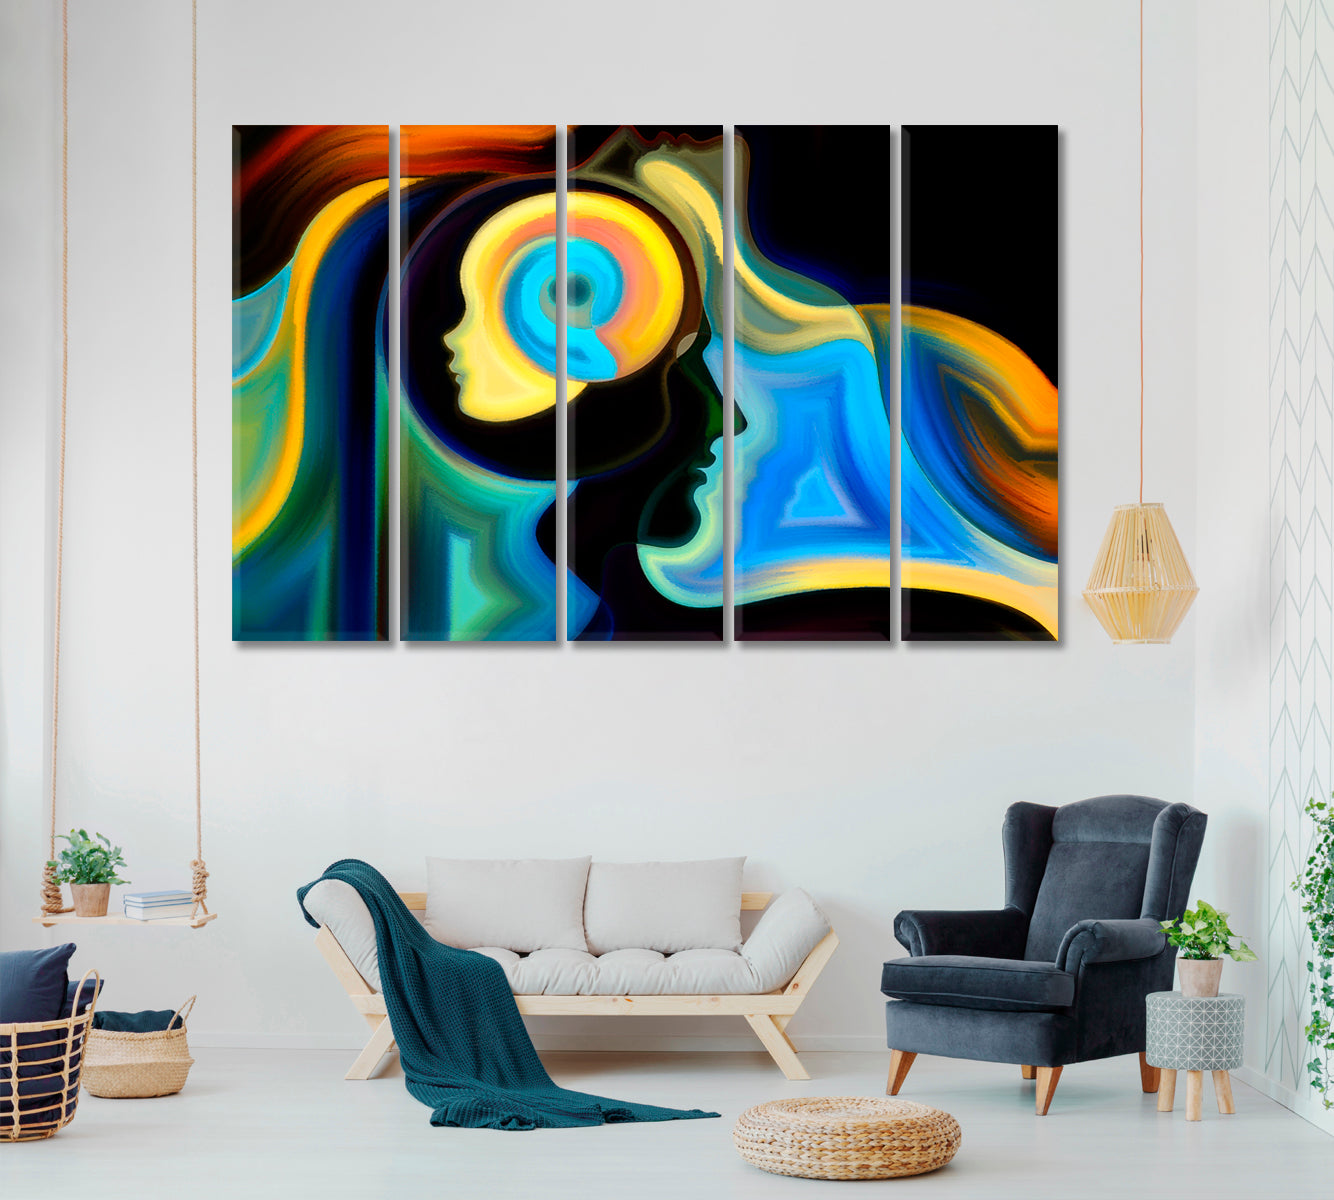 Abstract Allegory Consciousness Art Artesty 5 panels 36" x 24" 